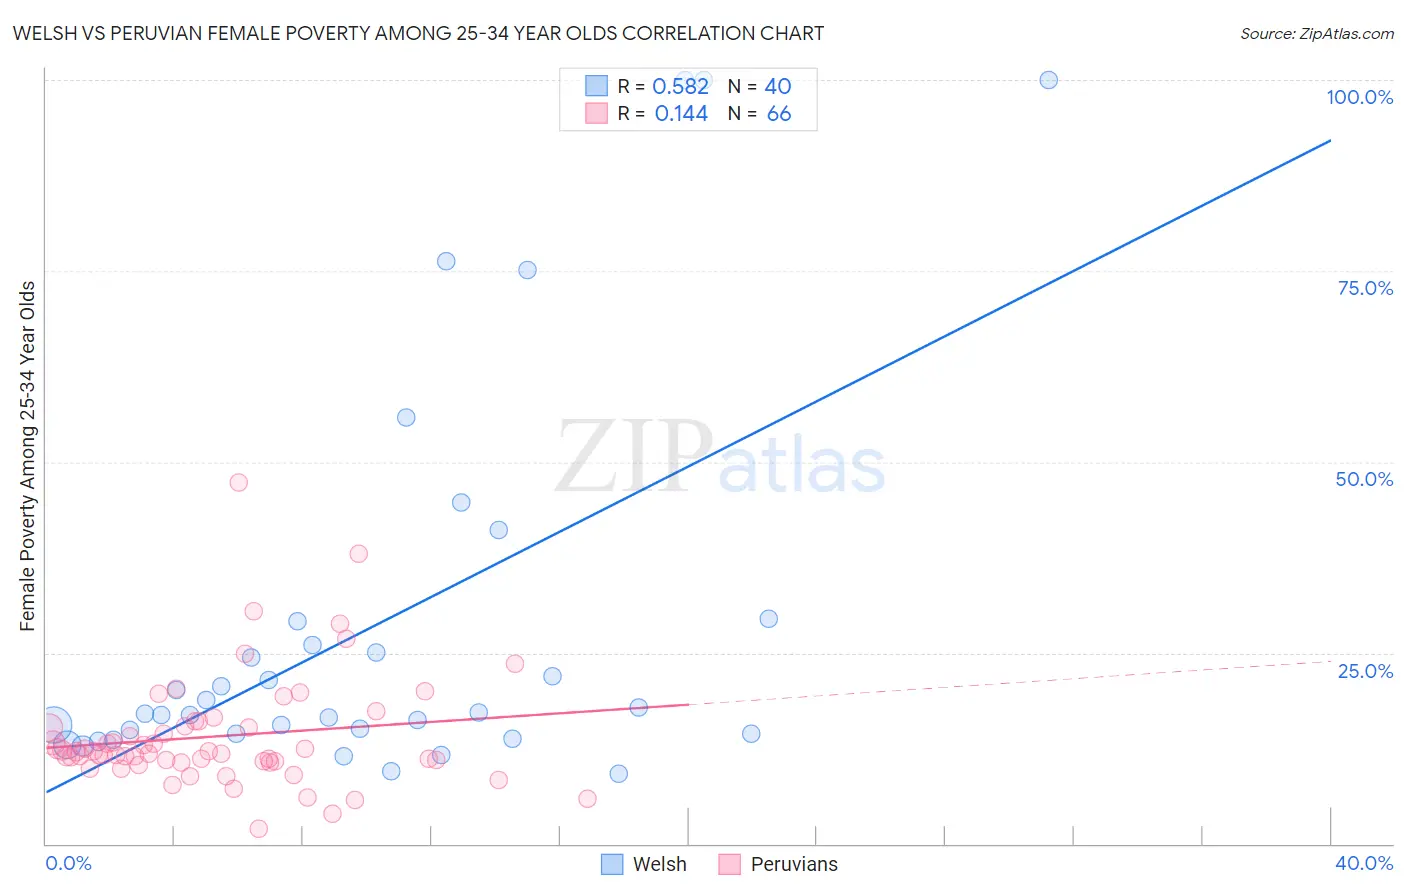 Welsh vs Peruvian Female Poverty Among 25-34 Year Olds